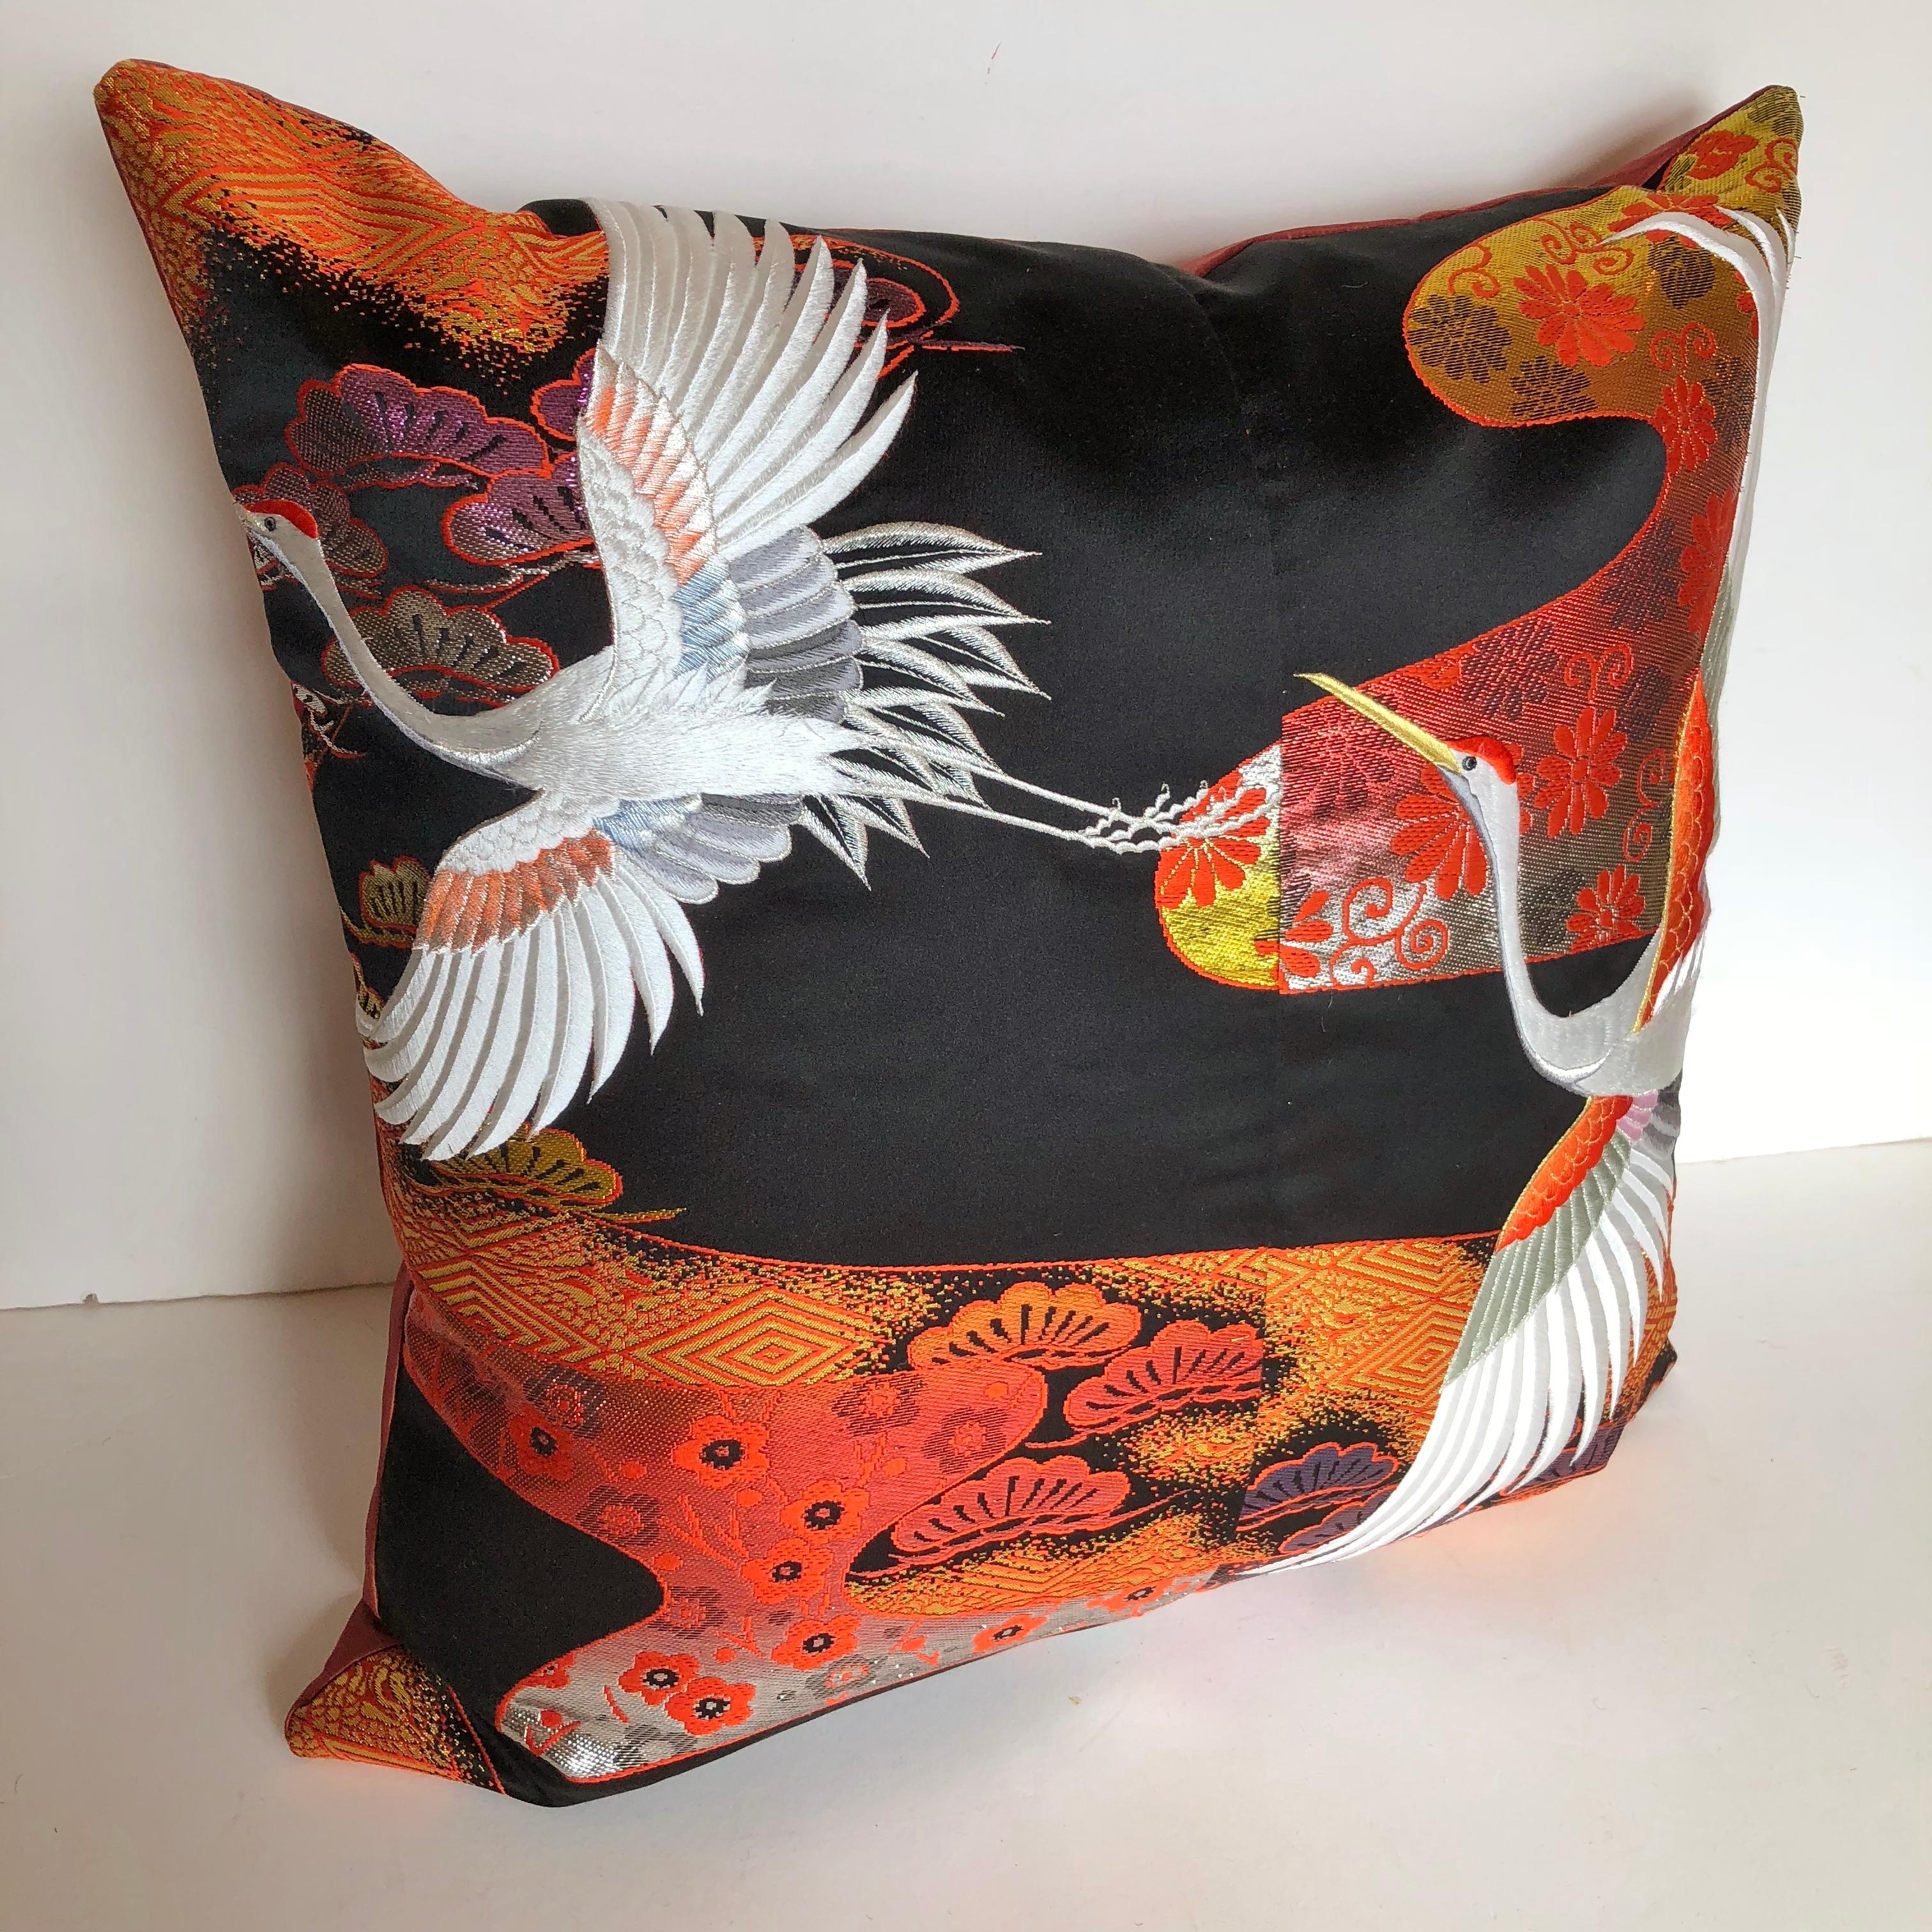 Custom pillow cut from a vintage Japanese silk Uchikake, the traditional wedding kimono. The silk textile has traditional designs with embroidered white cranes. The pillow is backed in silk, filled with an insert of 50/50 down and feathers and hand